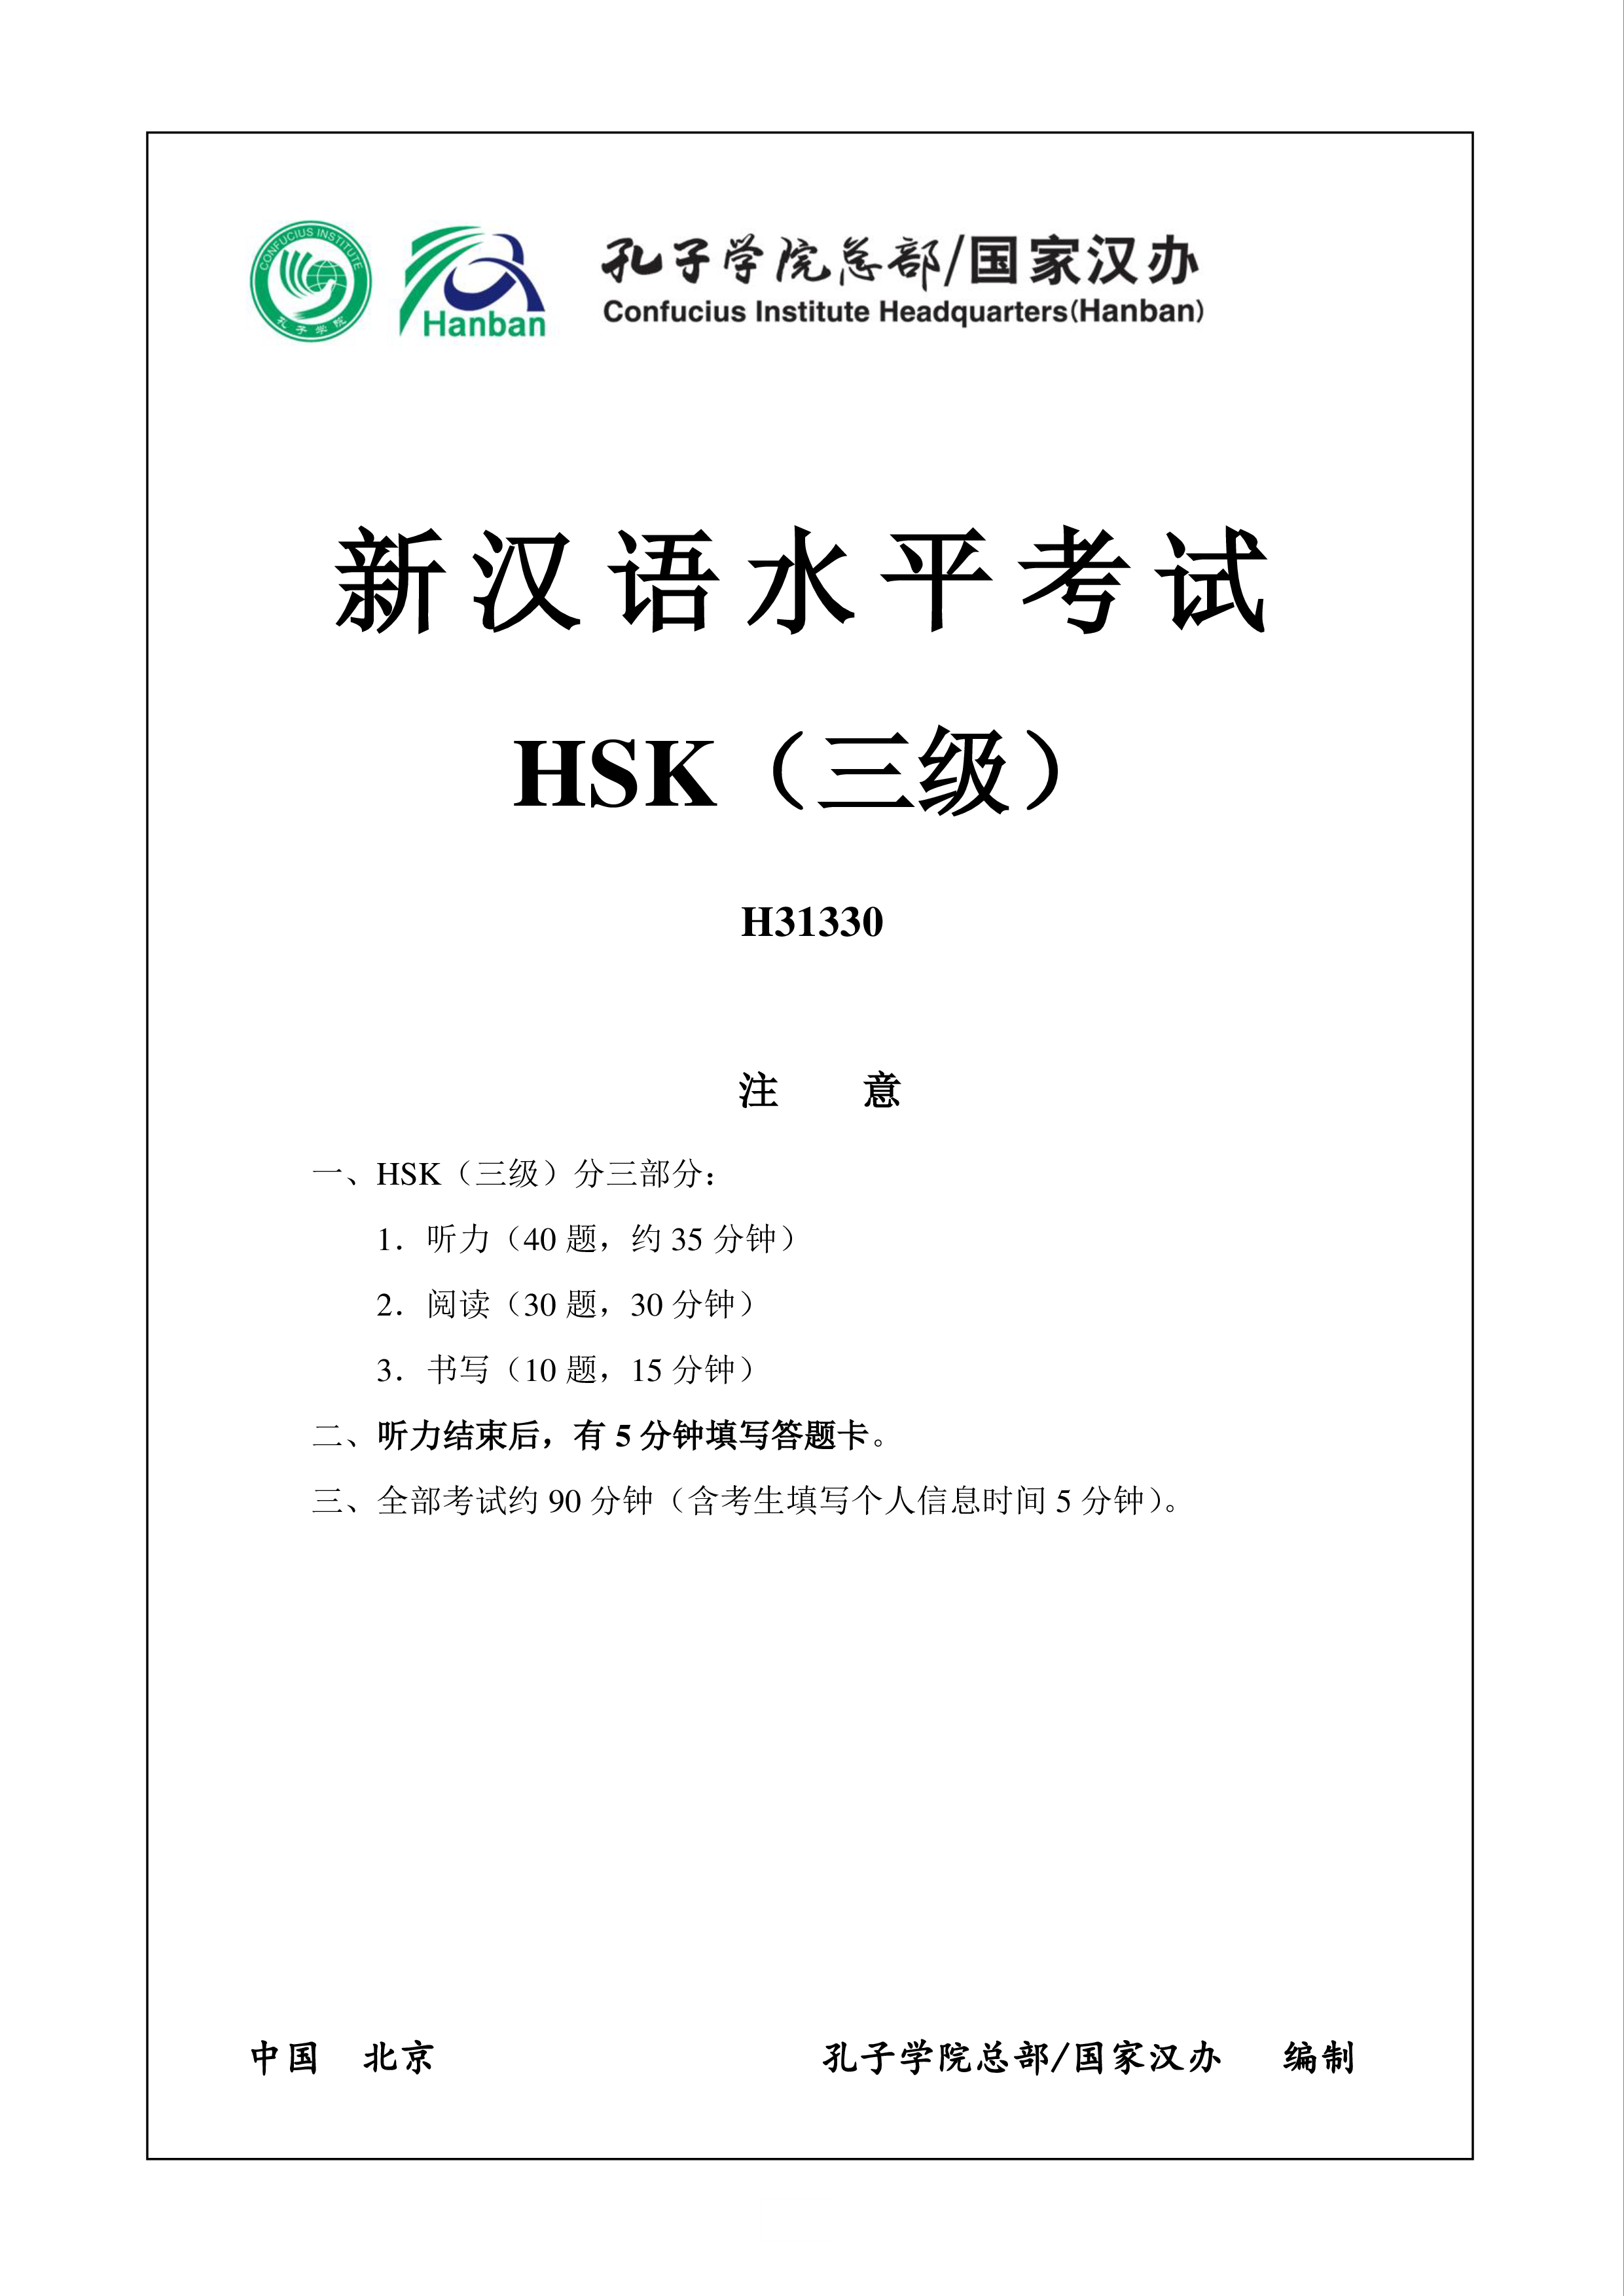 HSK3 Chinese Exam including Answers # HSK3 H31330 main image